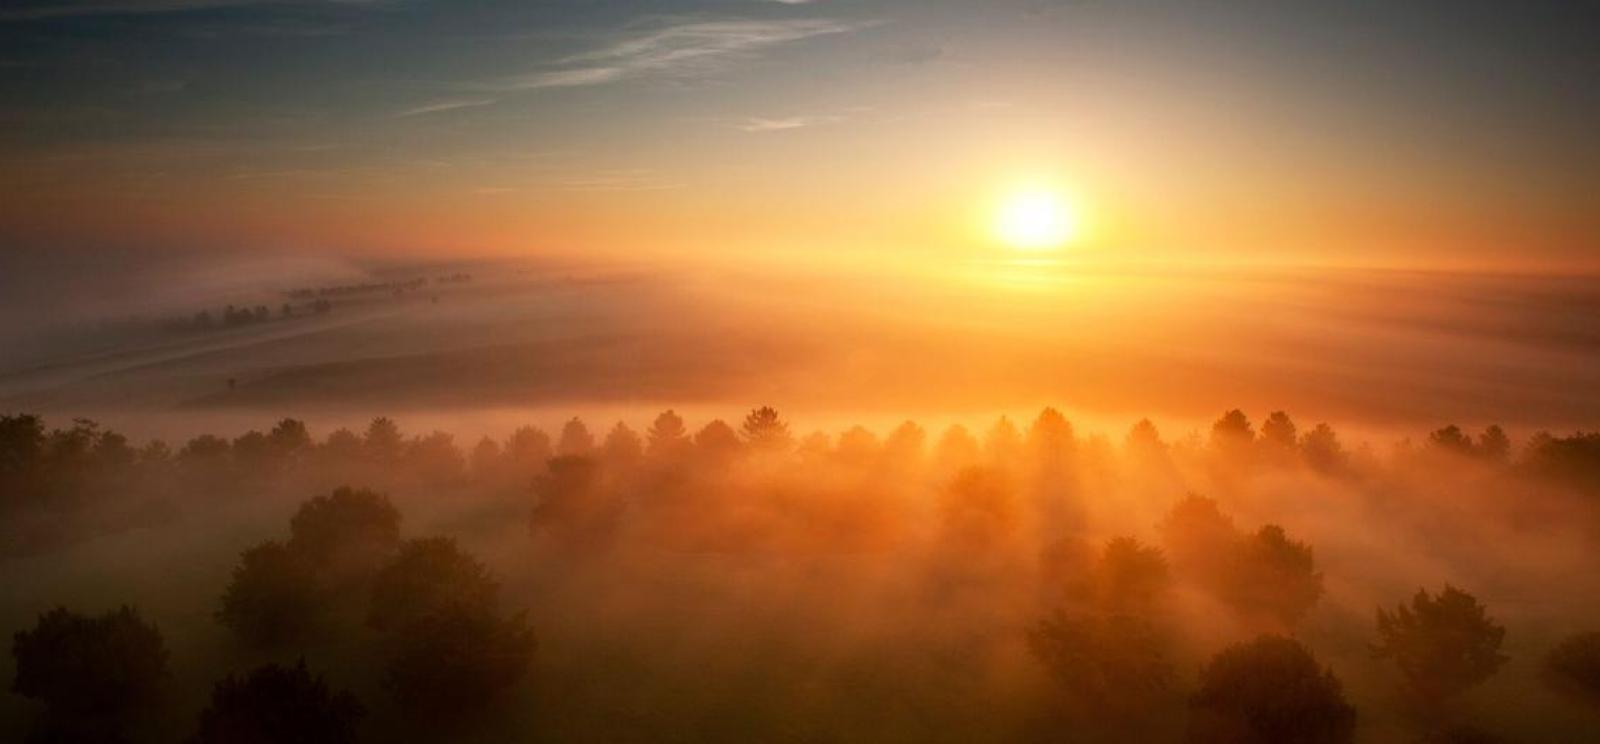 Photograph of a golden sunrise over a misty forest.